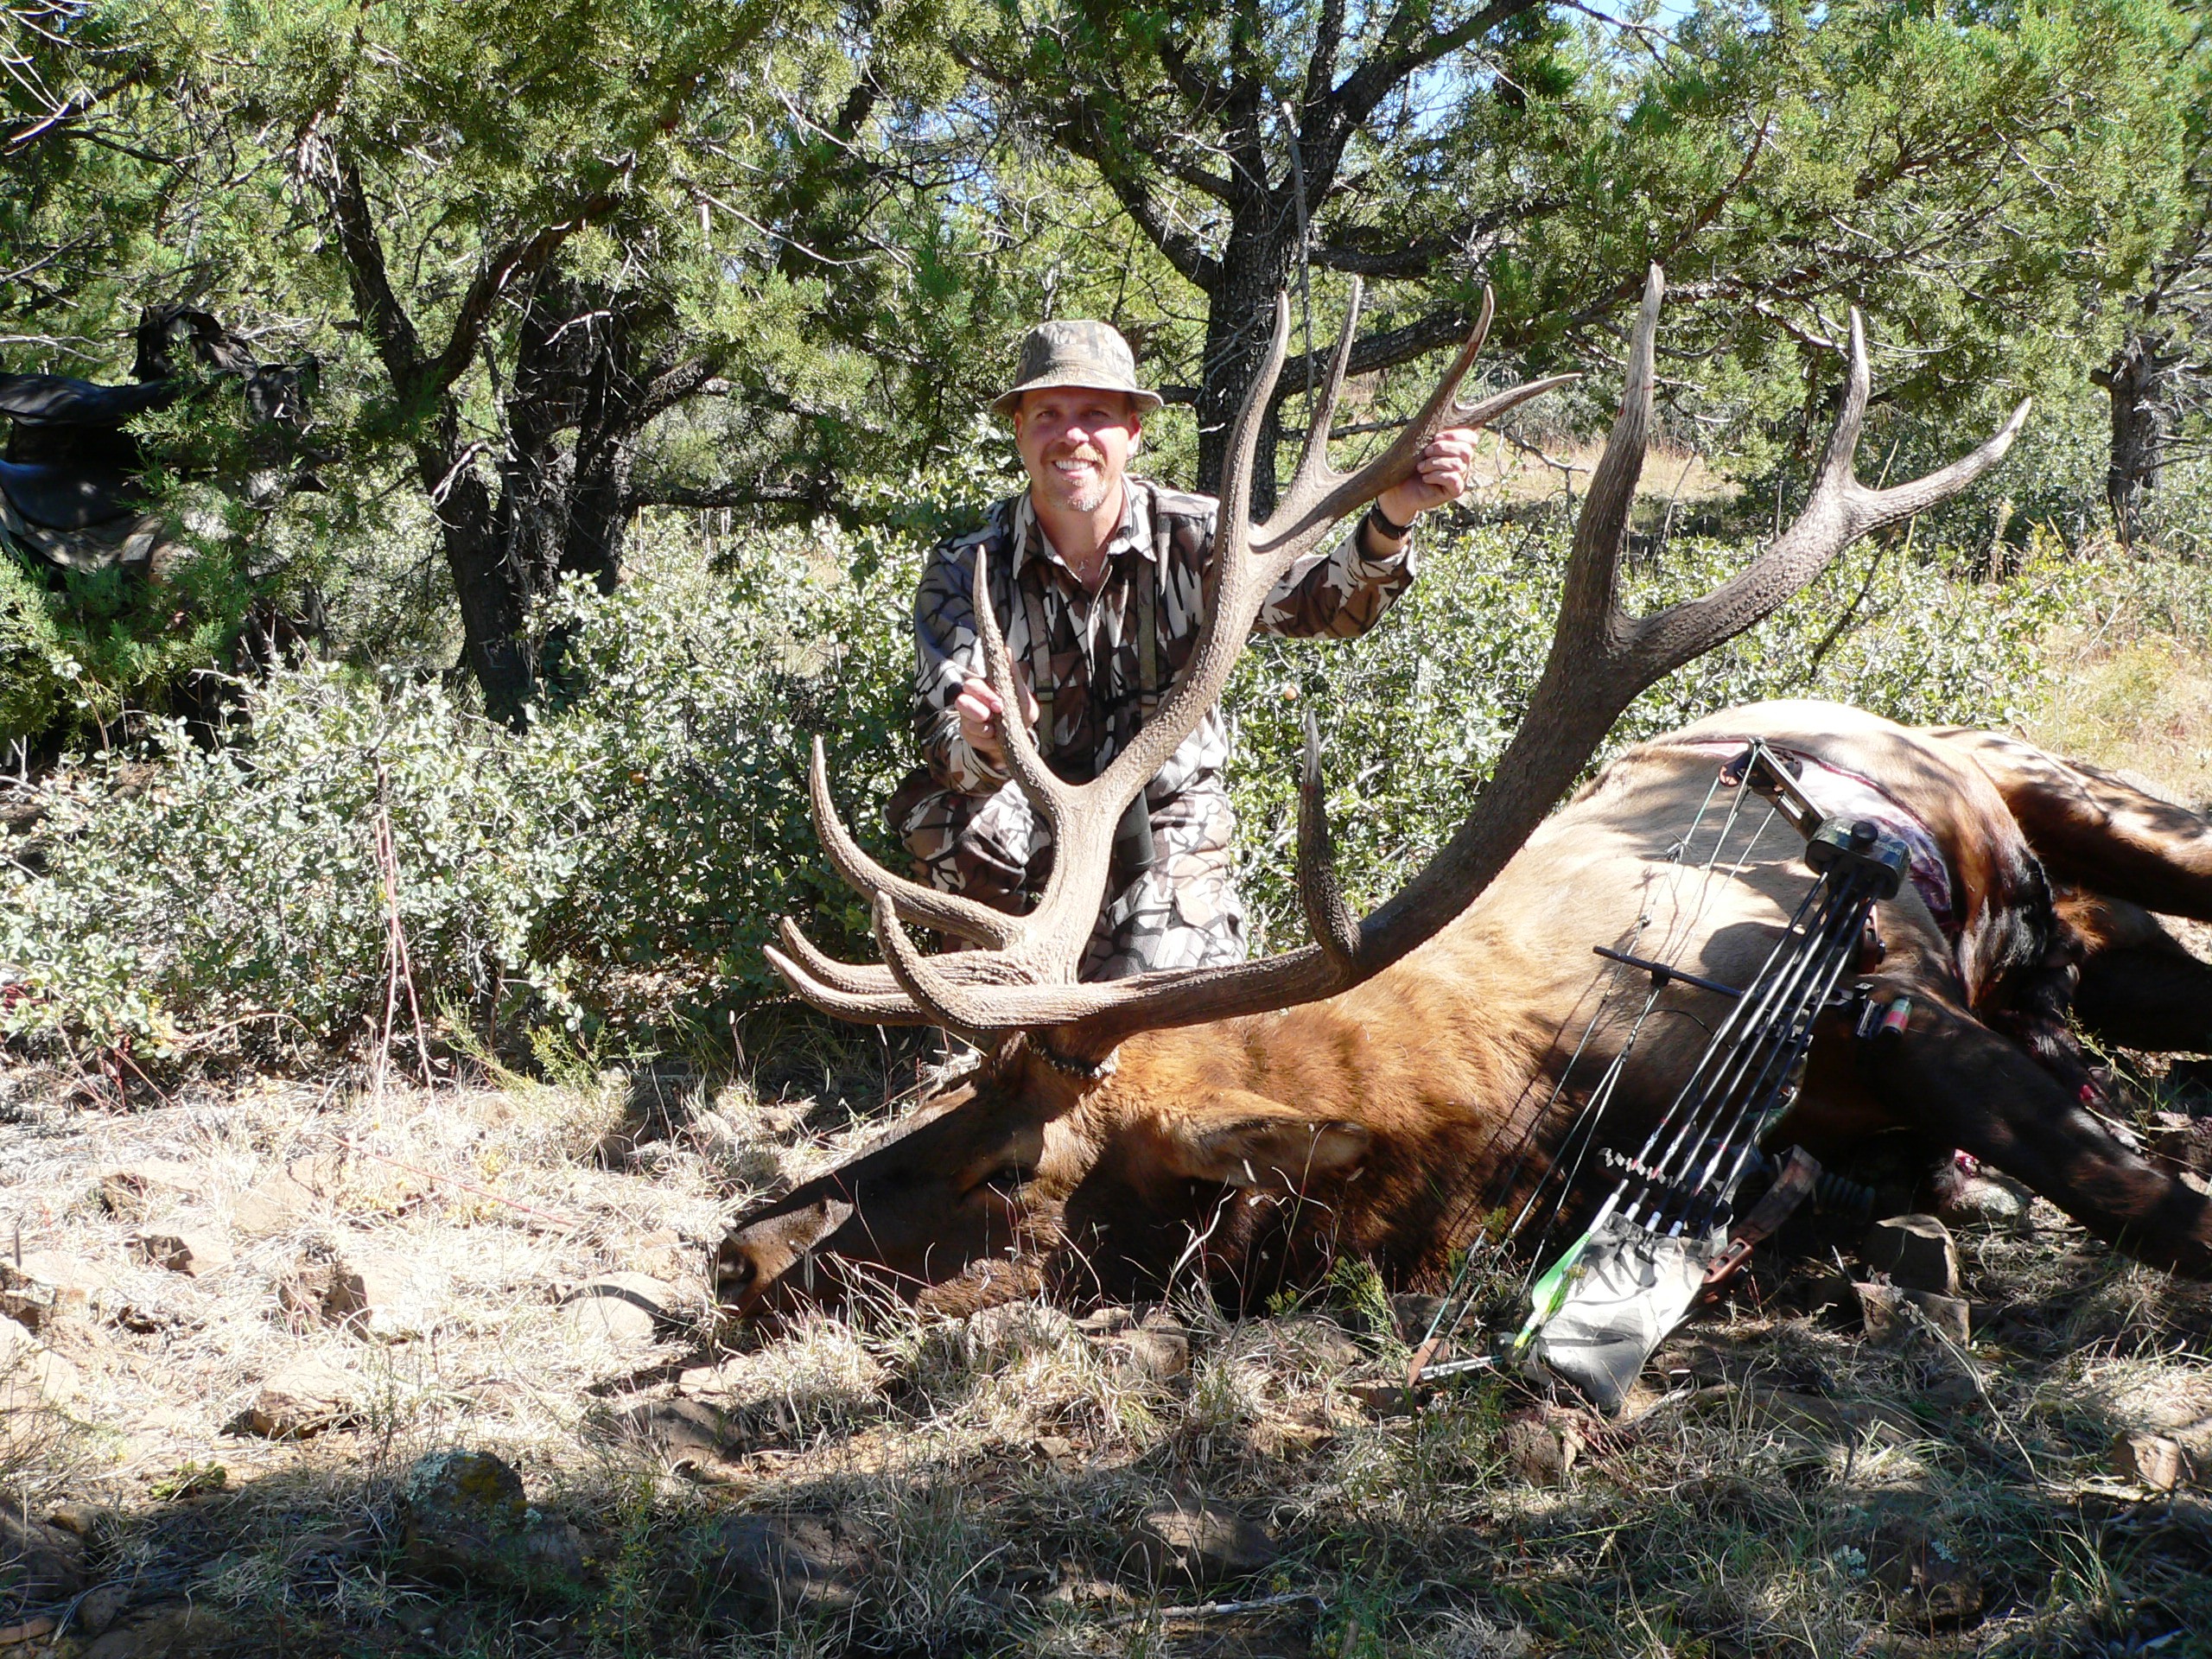 Roy Grace with an amazing bull elk while bowhunting.